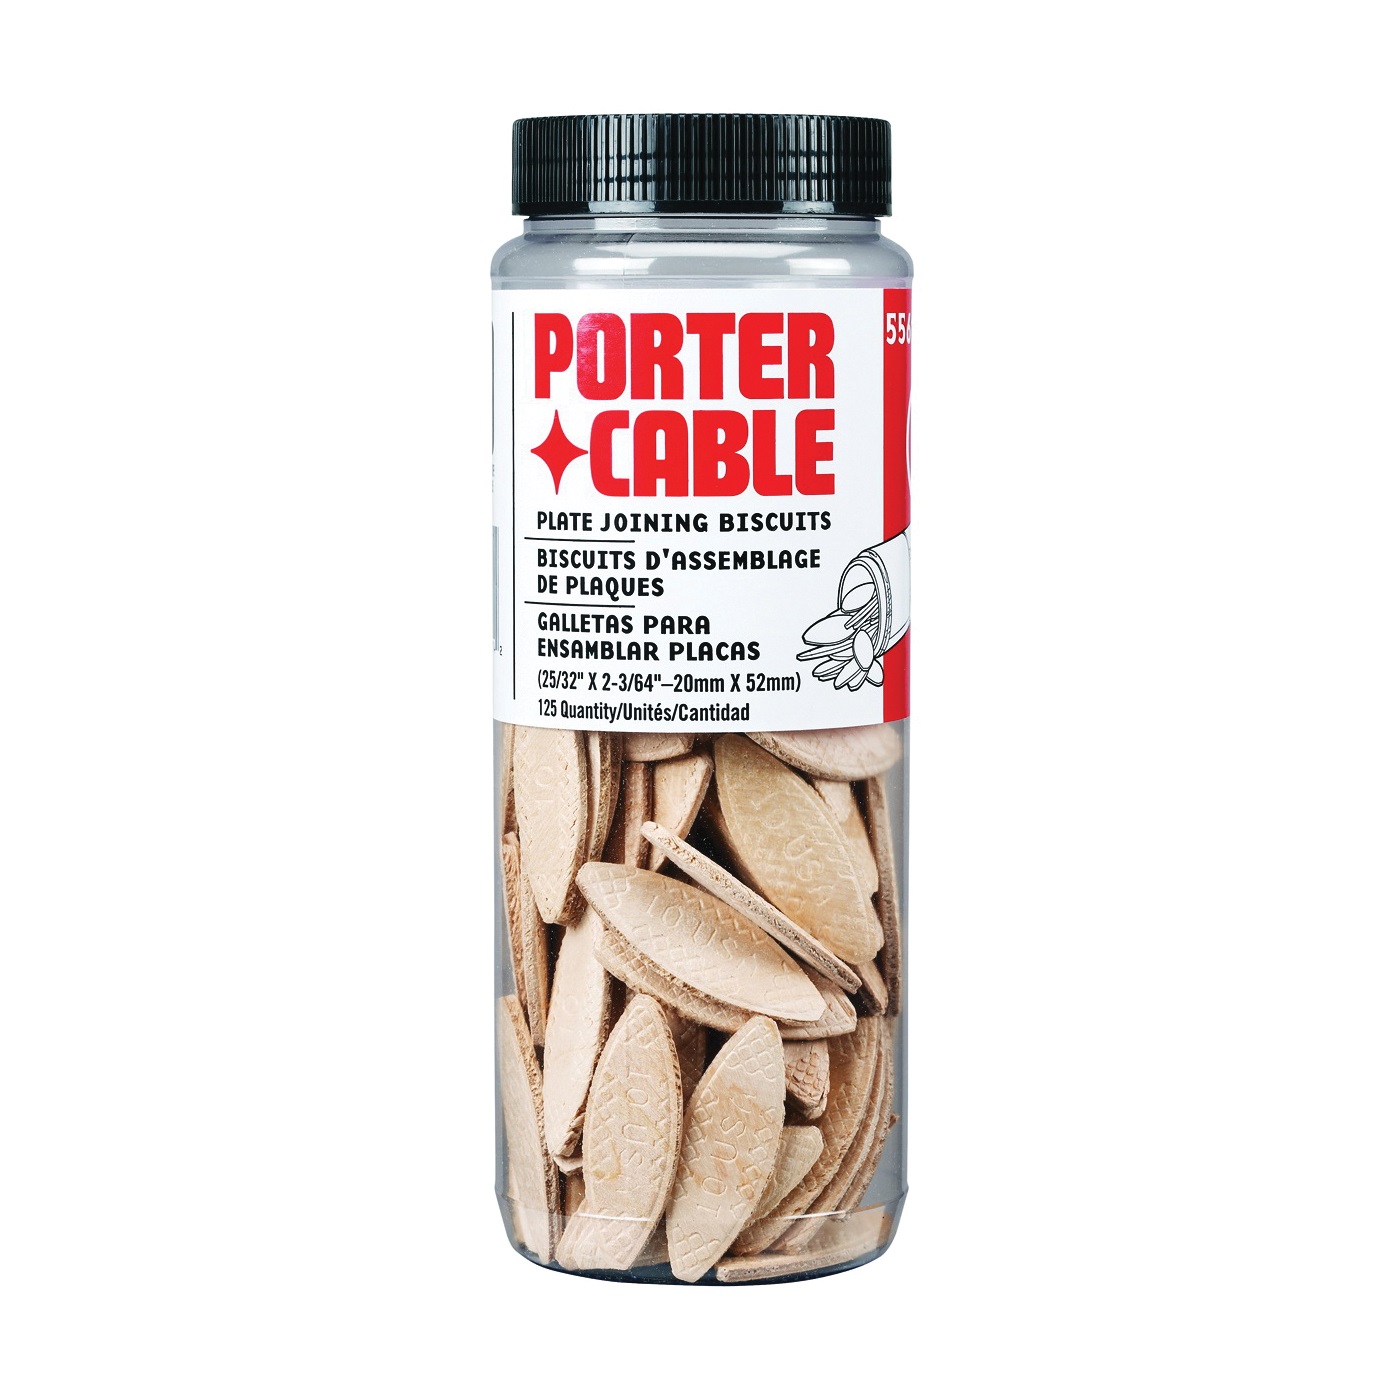 Porter-cable 5561